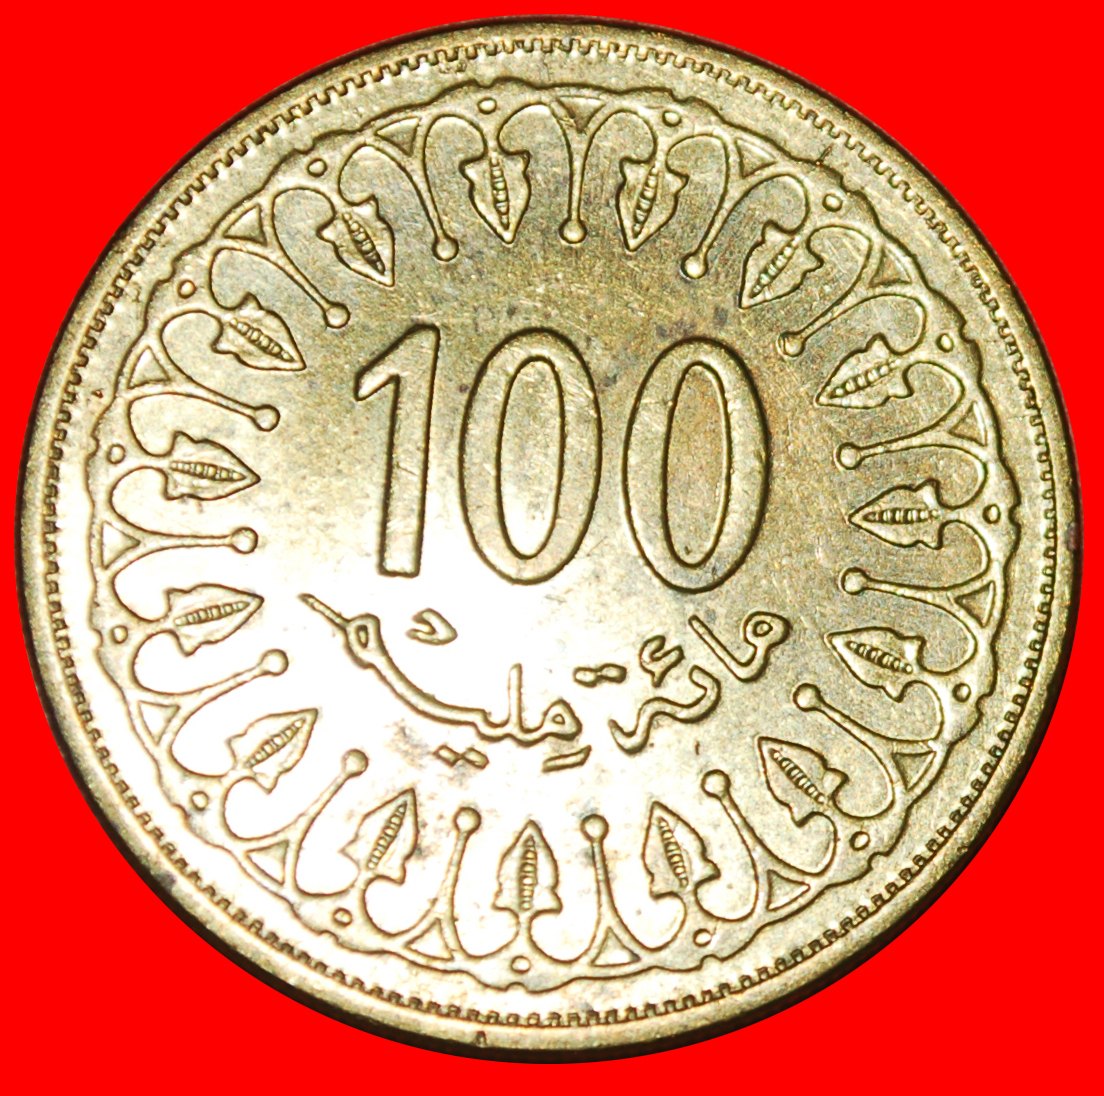  * GREAT BRITAIN (1960-2018): TUNISIA ★100 MILLIEMES 1432-2011 NON-MAGNETIC★LOW START ★ NO RESERVE!!!   